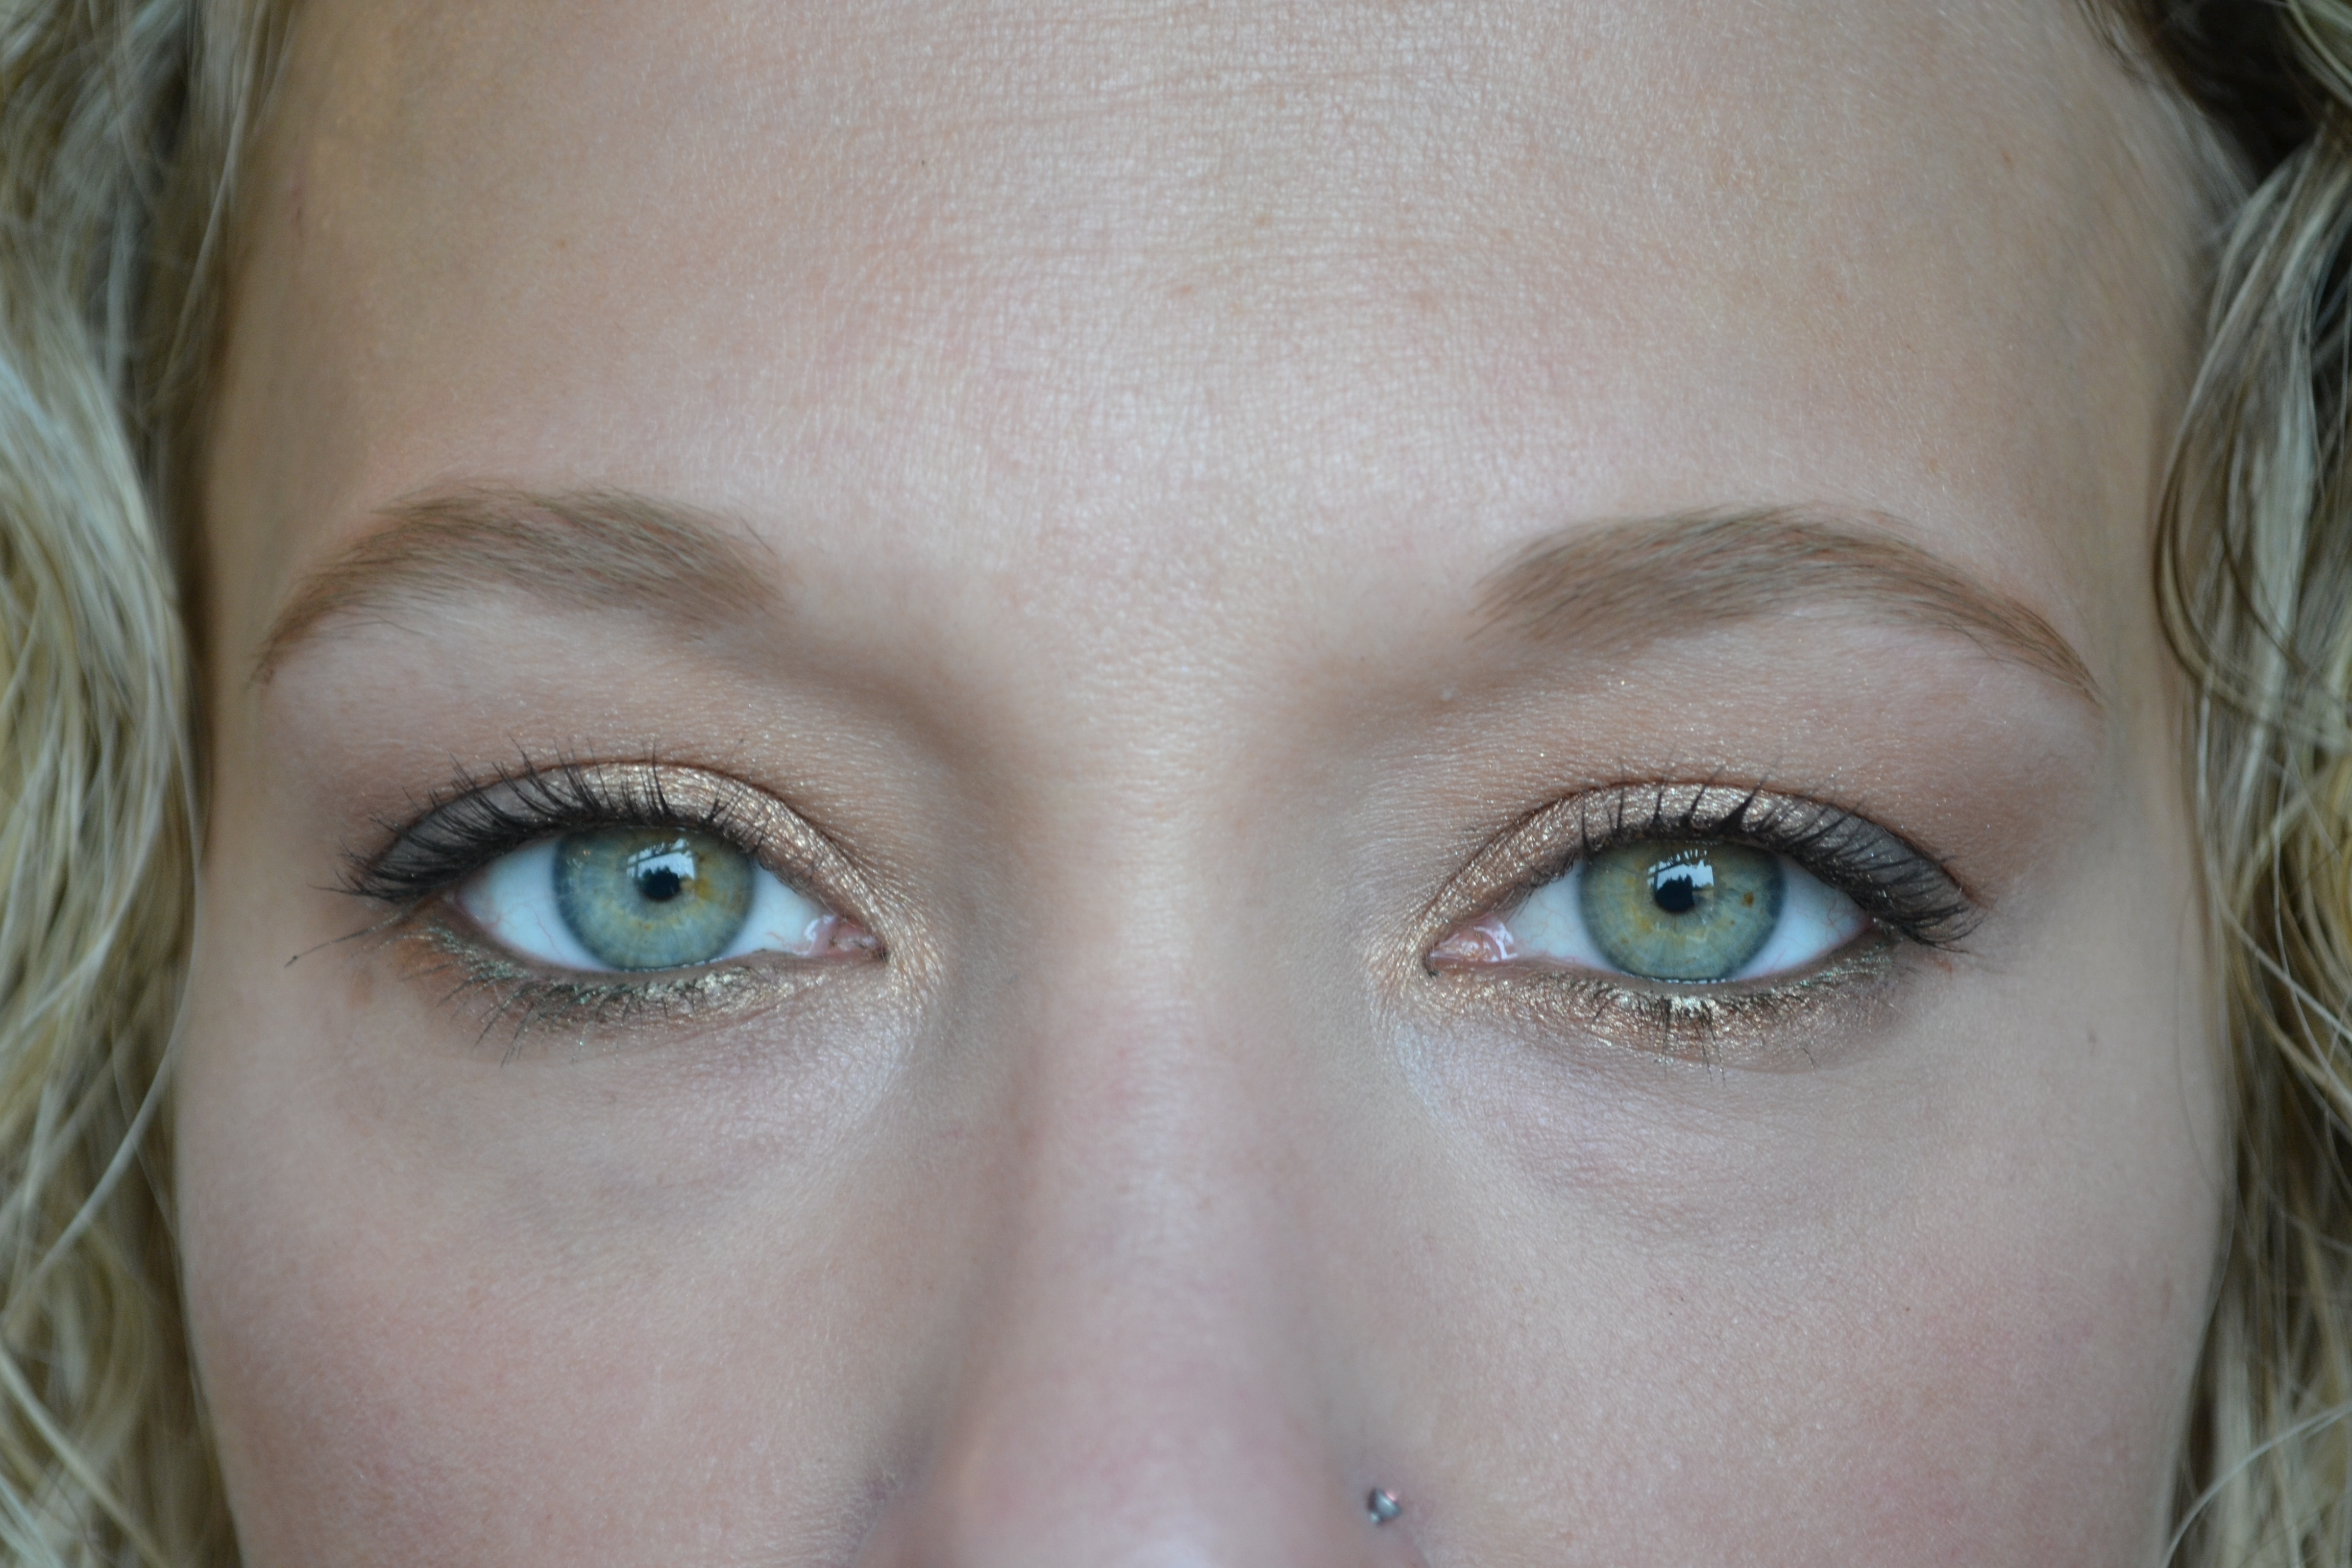 The ethnic implications of green eyes